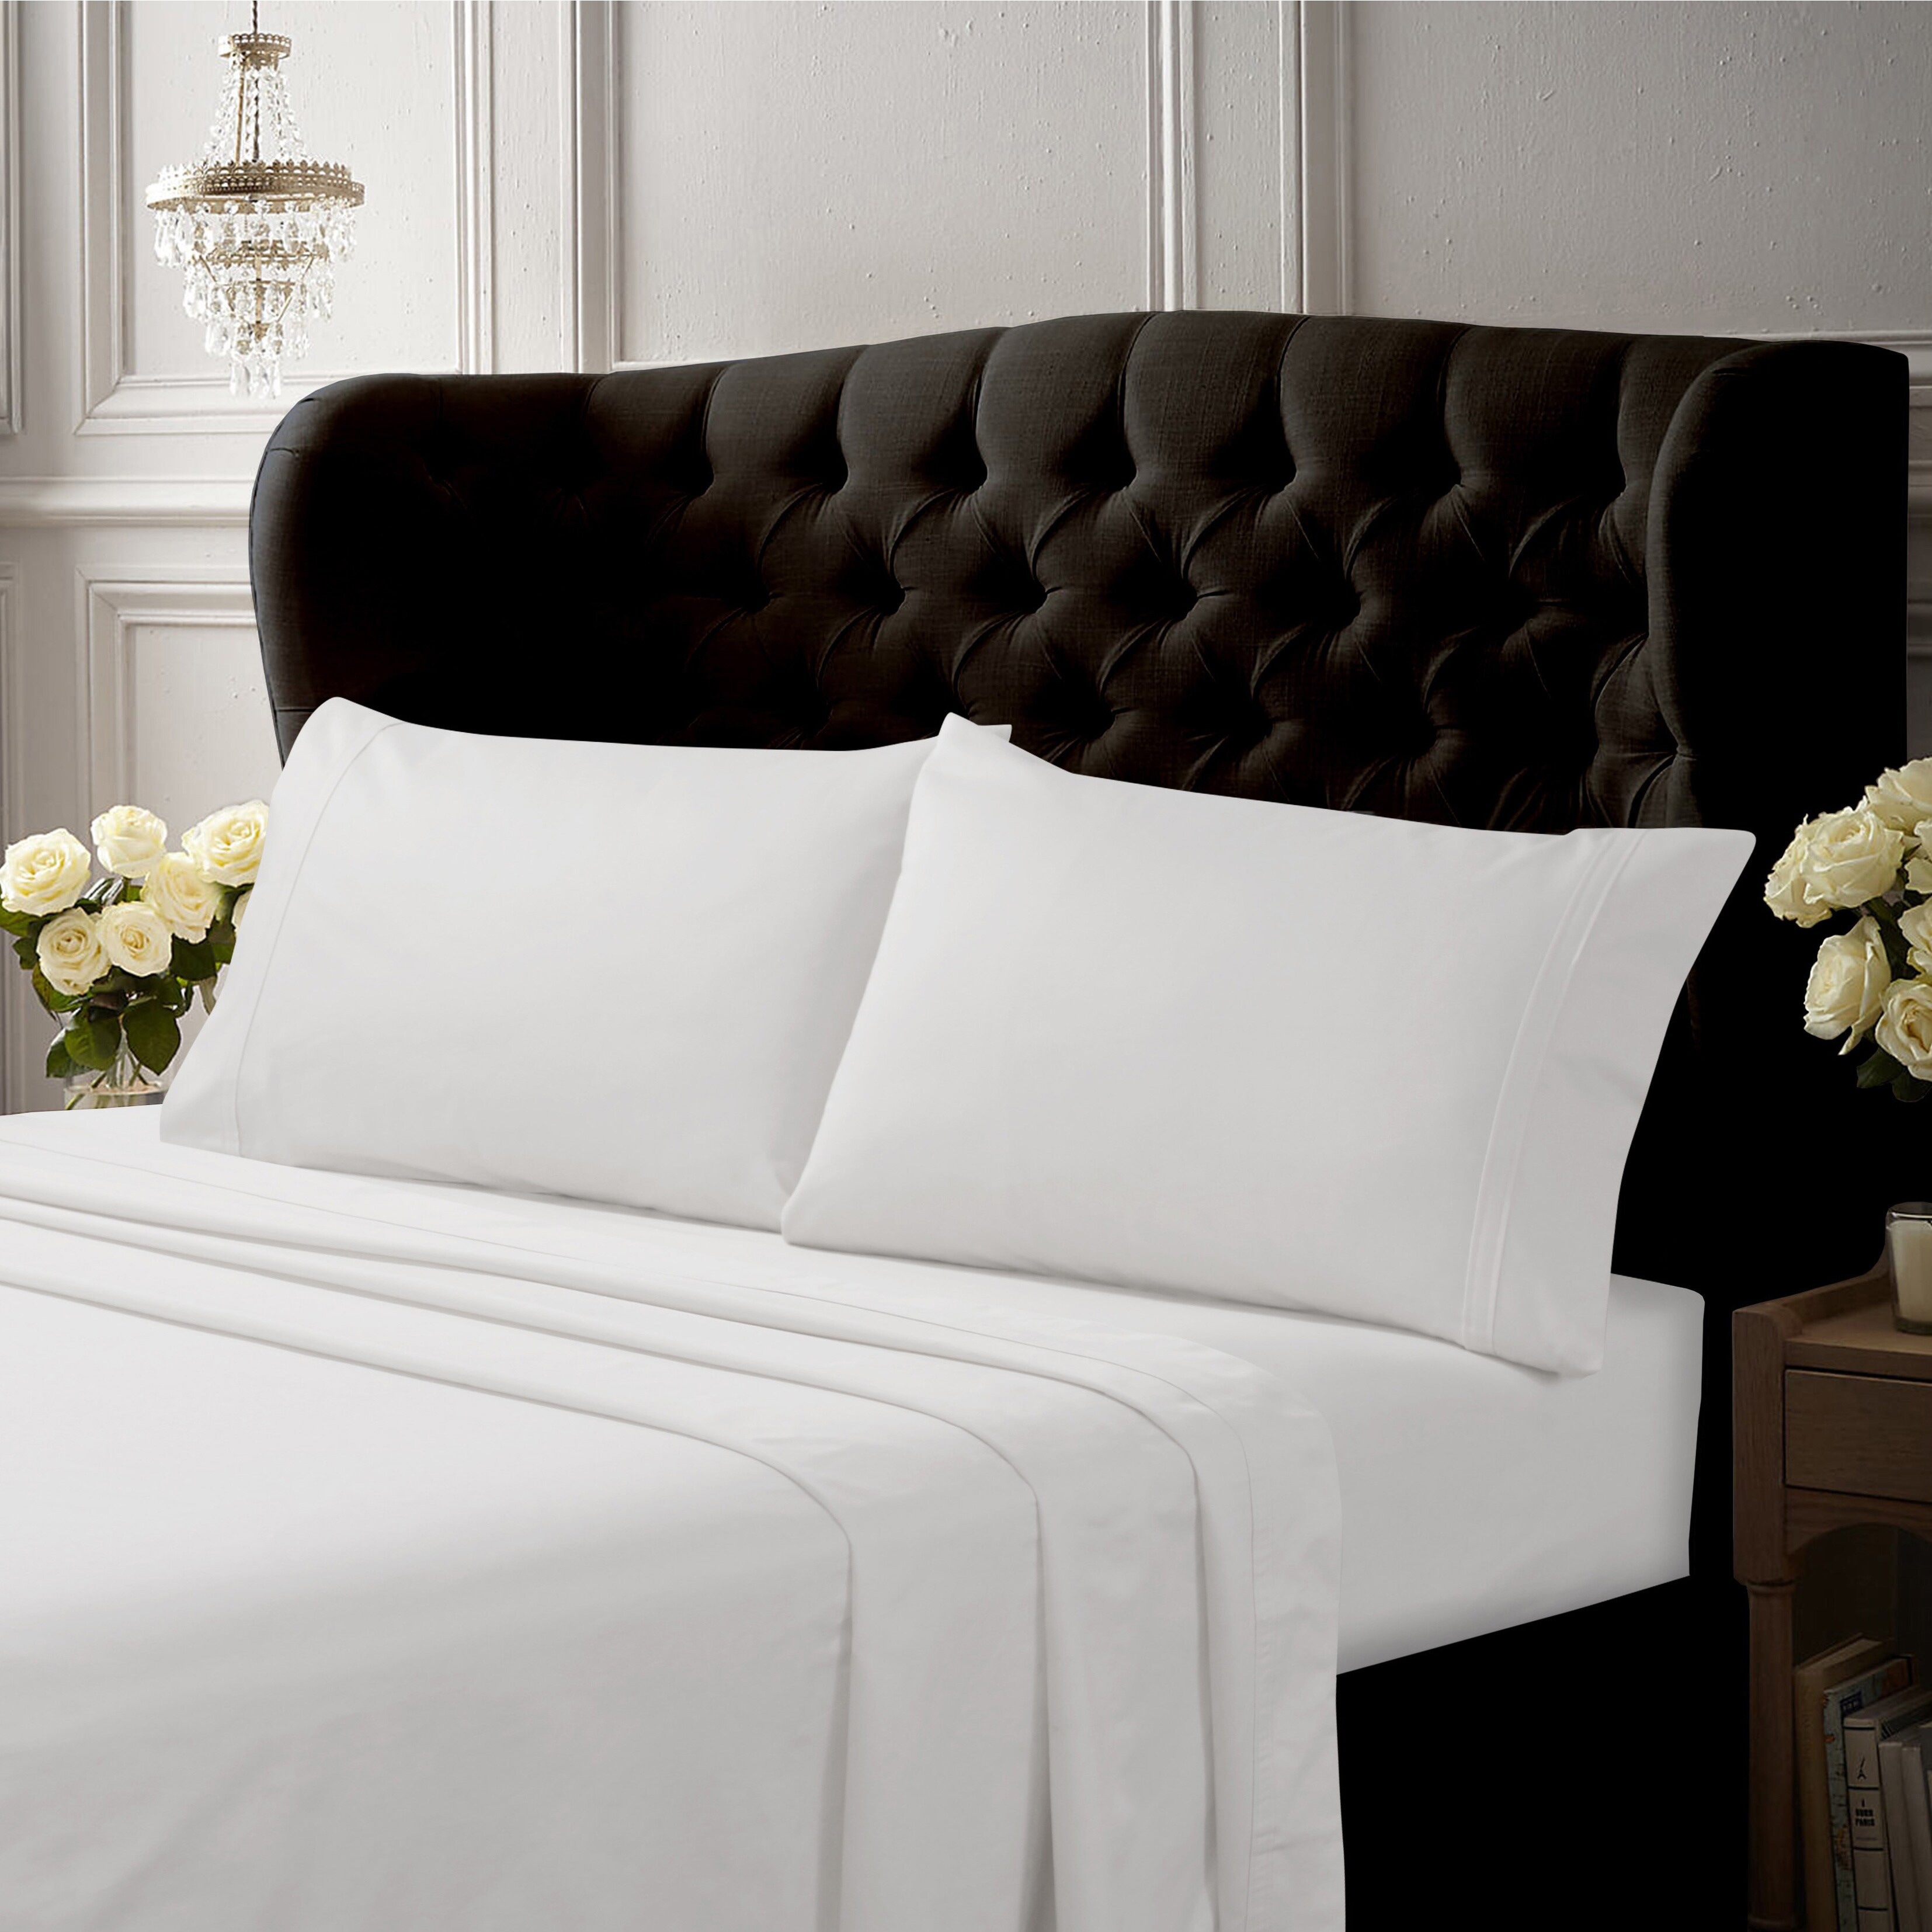 DEEP FITTED BED SHEETS 100% EGYPTIAN COTTON EXTRA 200 THREAD COUNT 